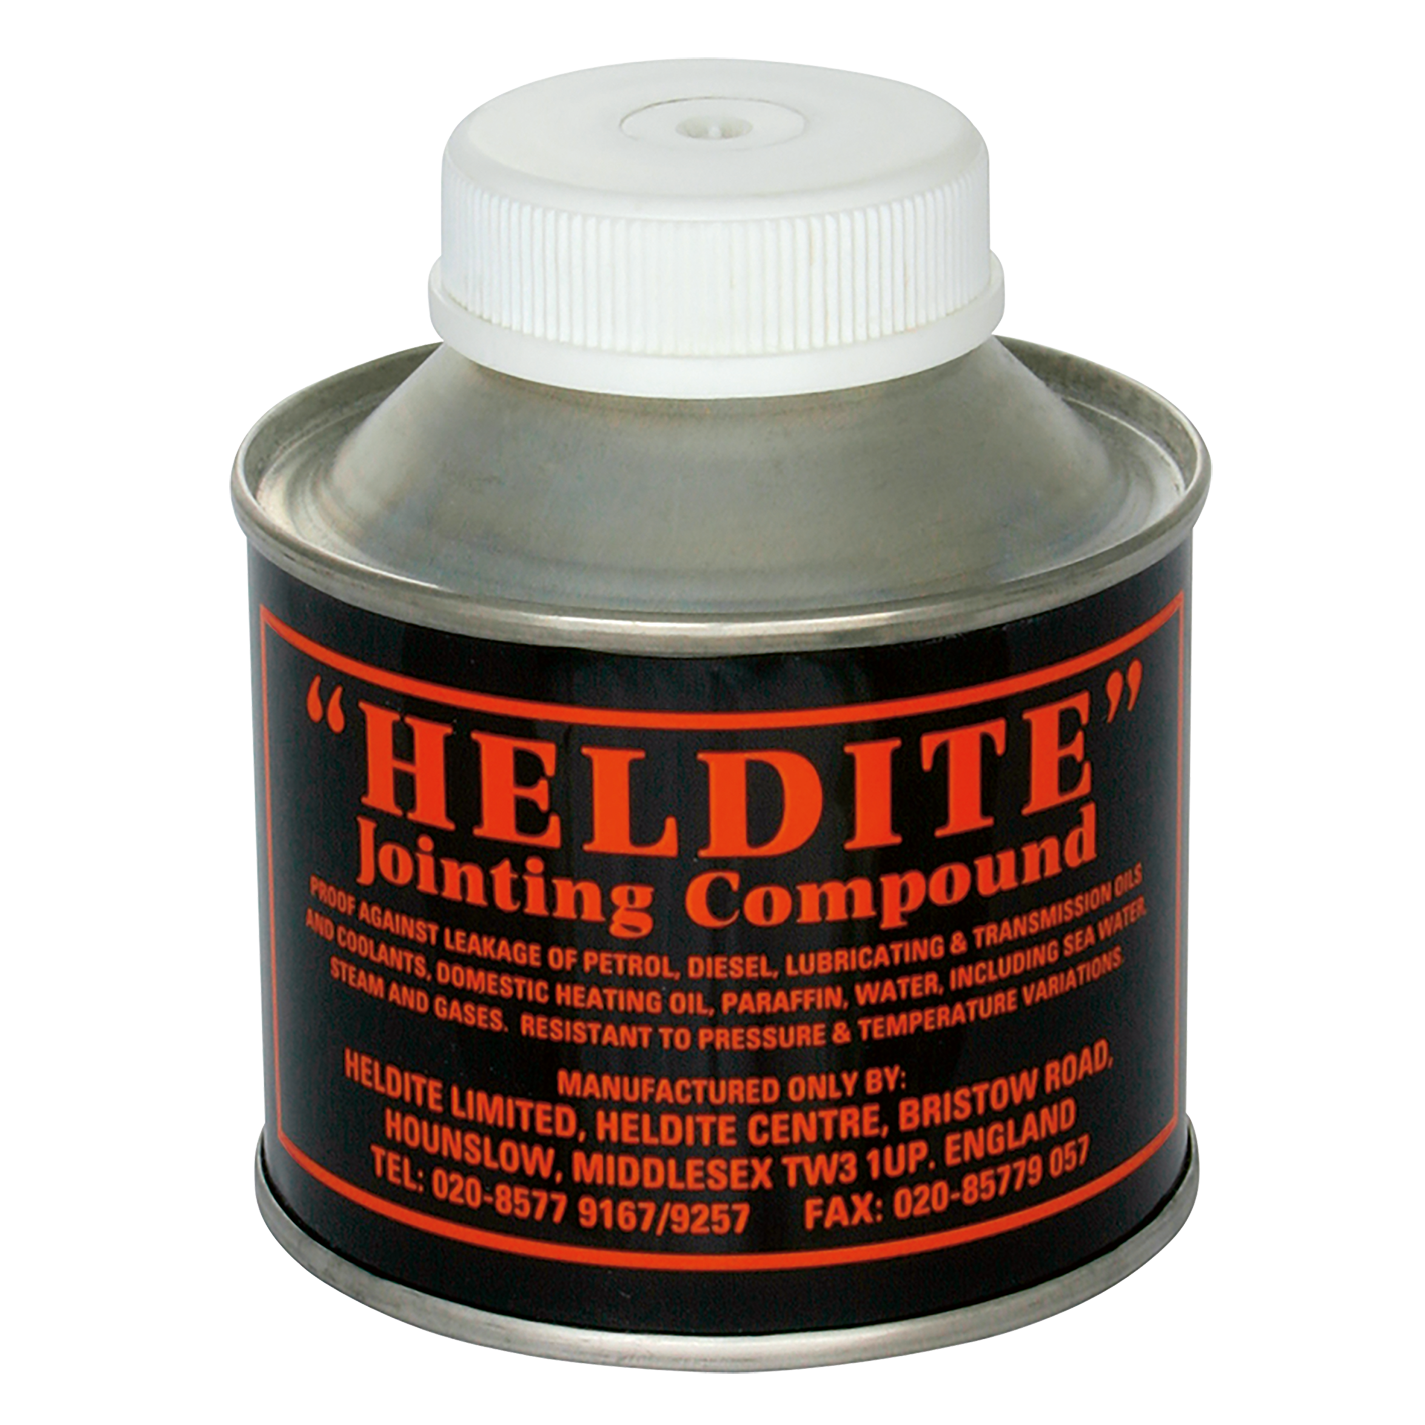 250ML TIN HELDITE JOINTING COMPOUND